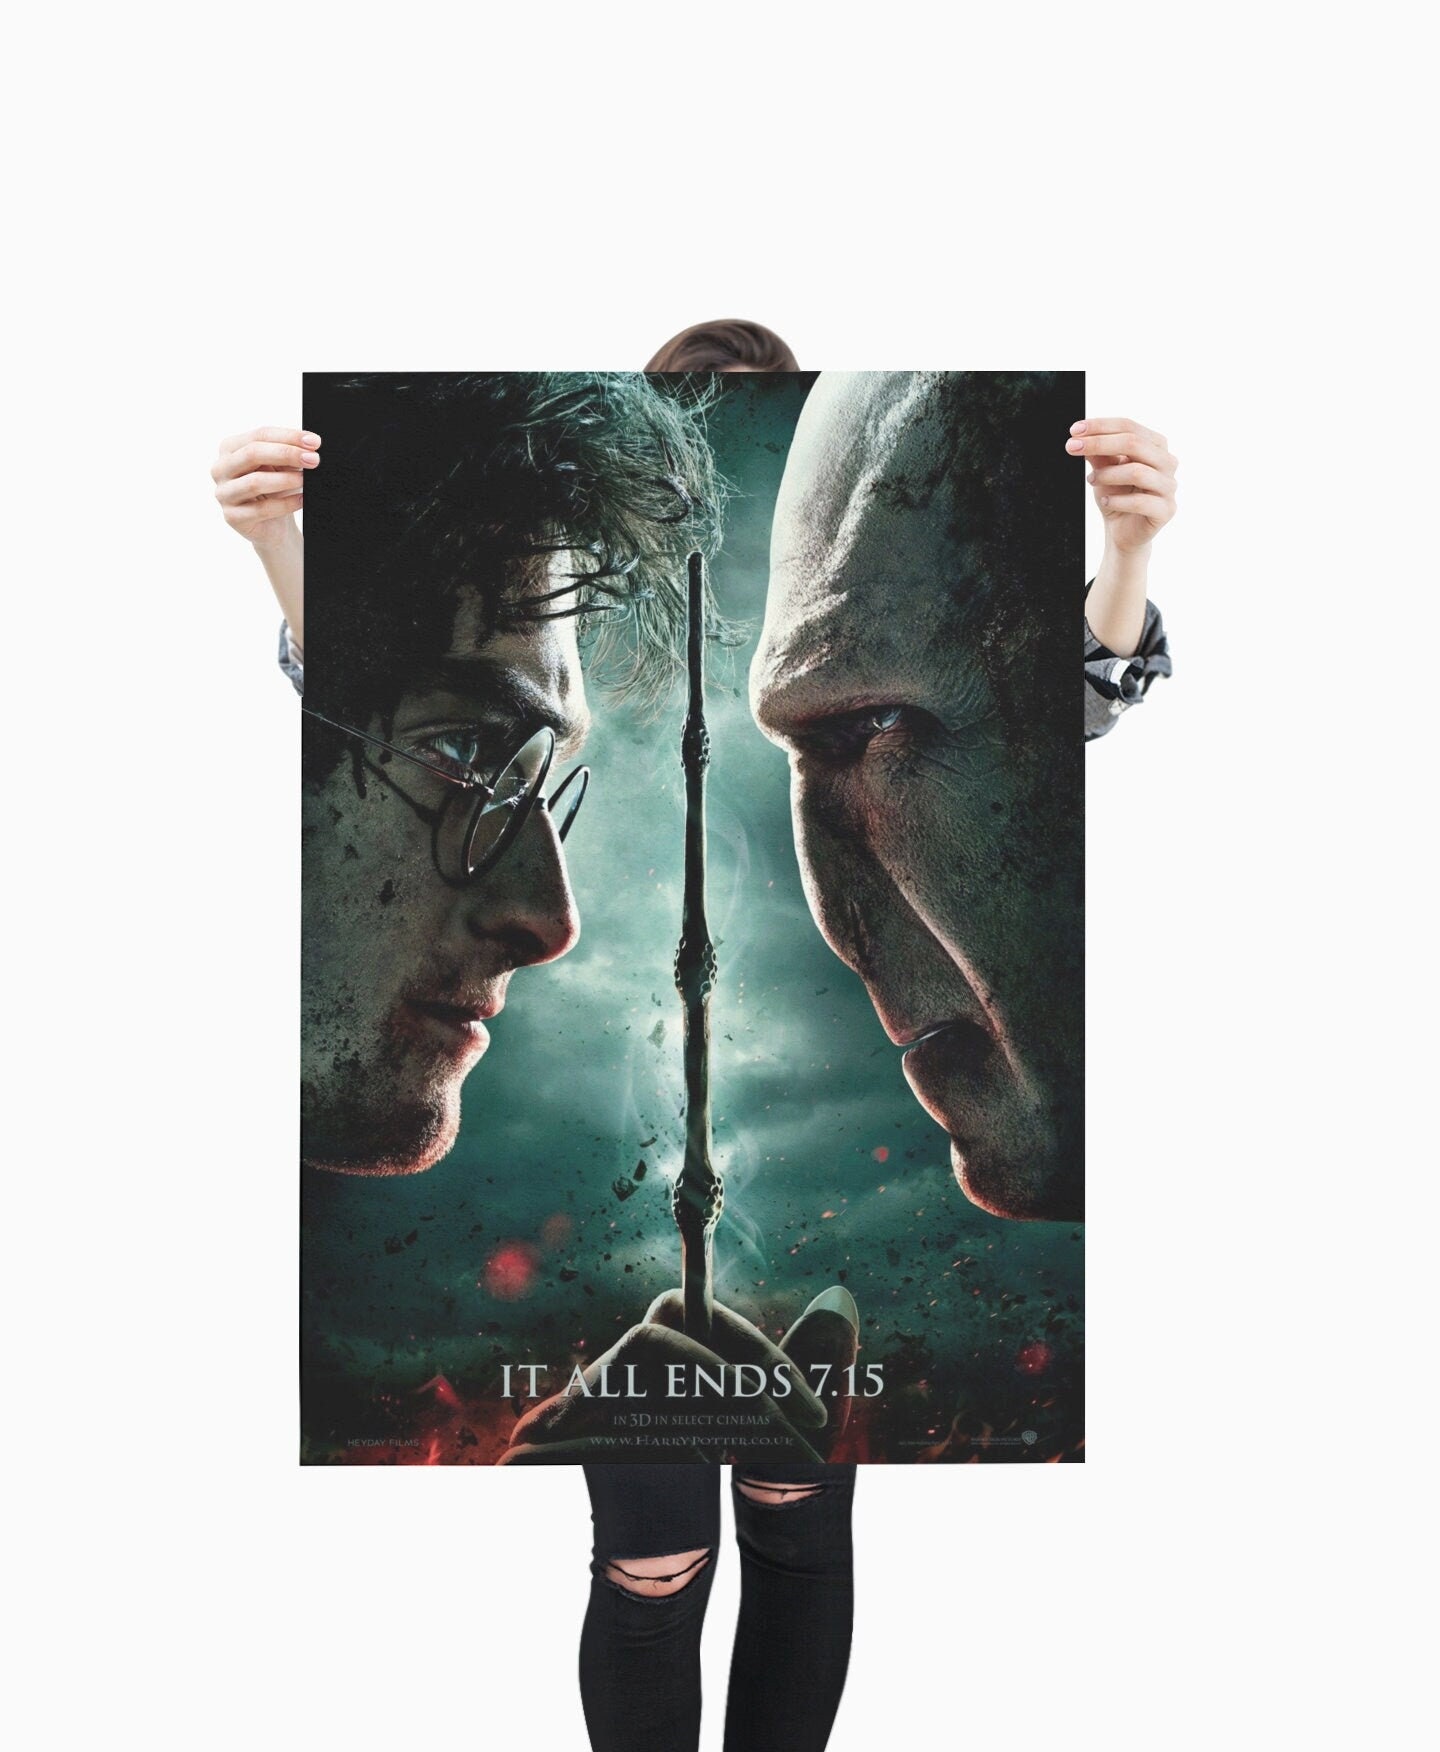 Harry Potter And The Deathly Hallows Movie Poster Print T463